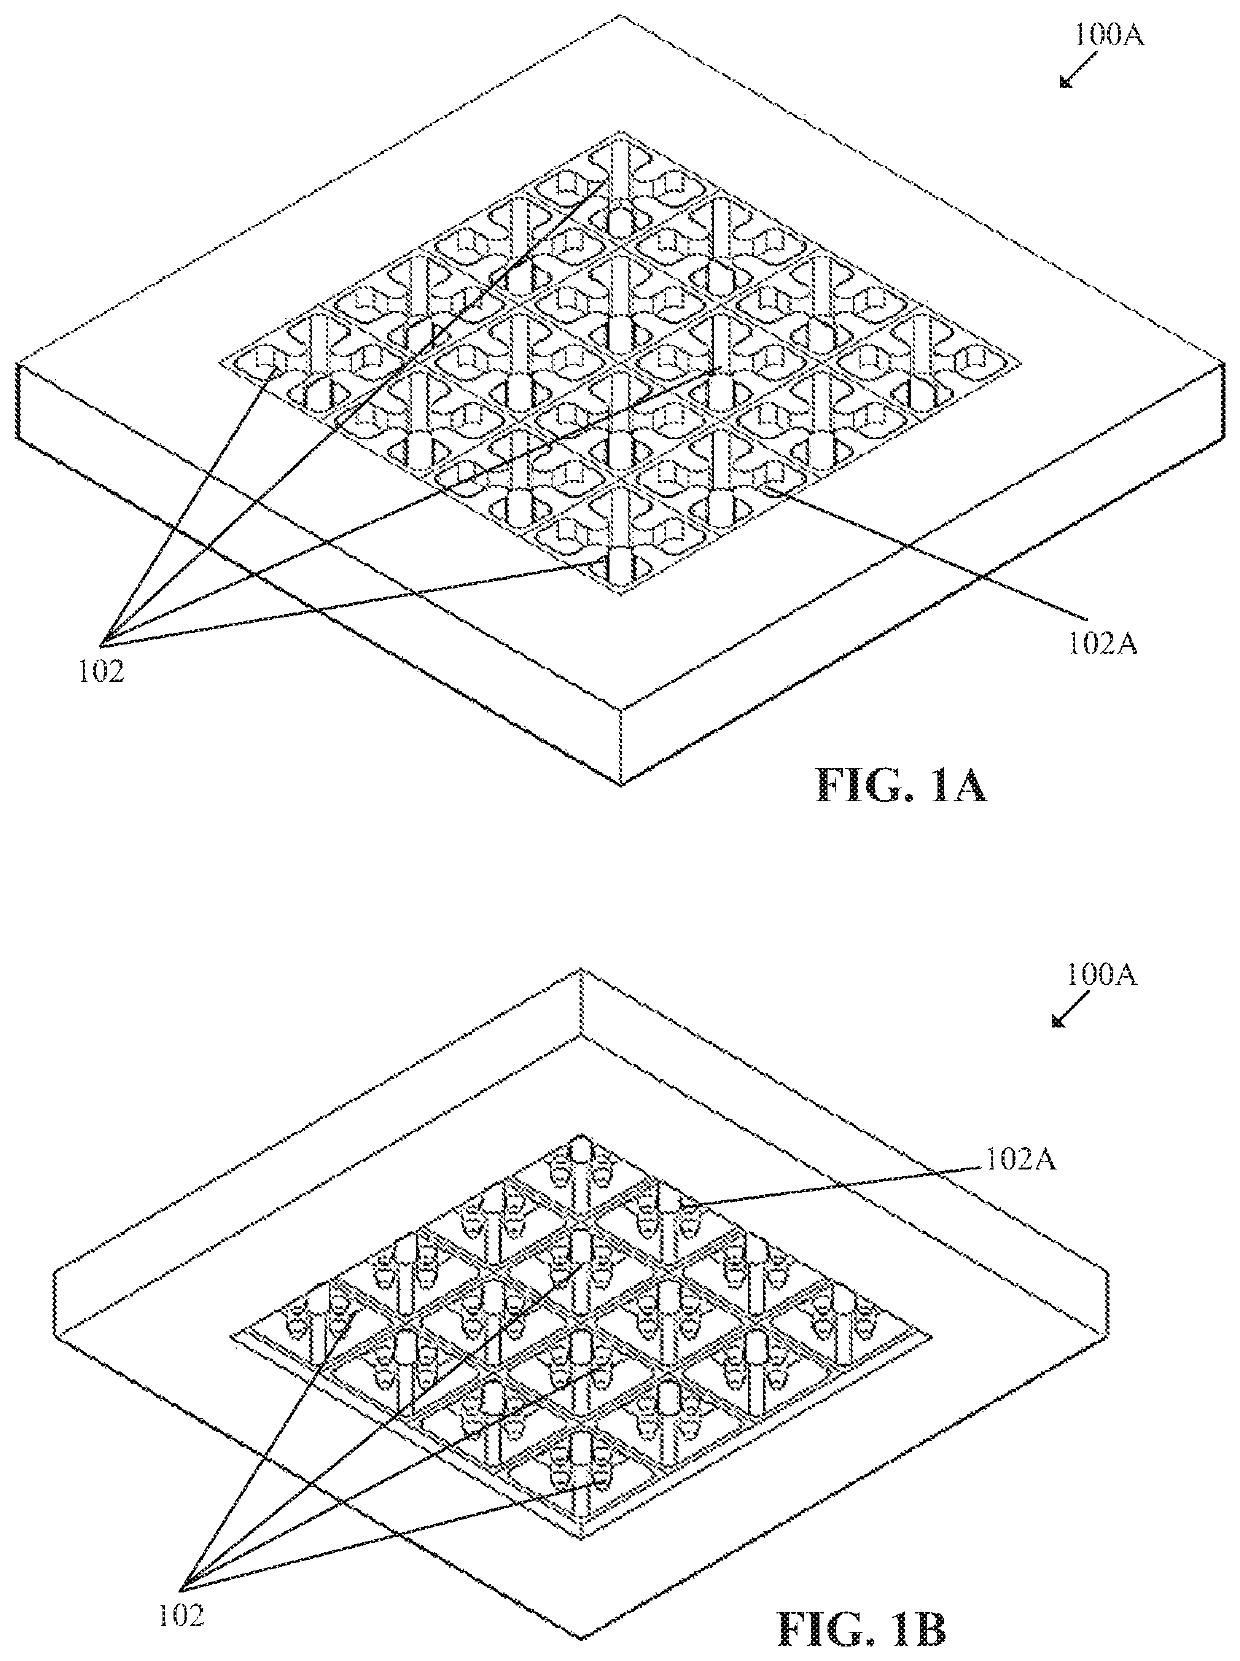 Waveguide antenna element-based beam forming phased array antenna system for millimeter wave communication